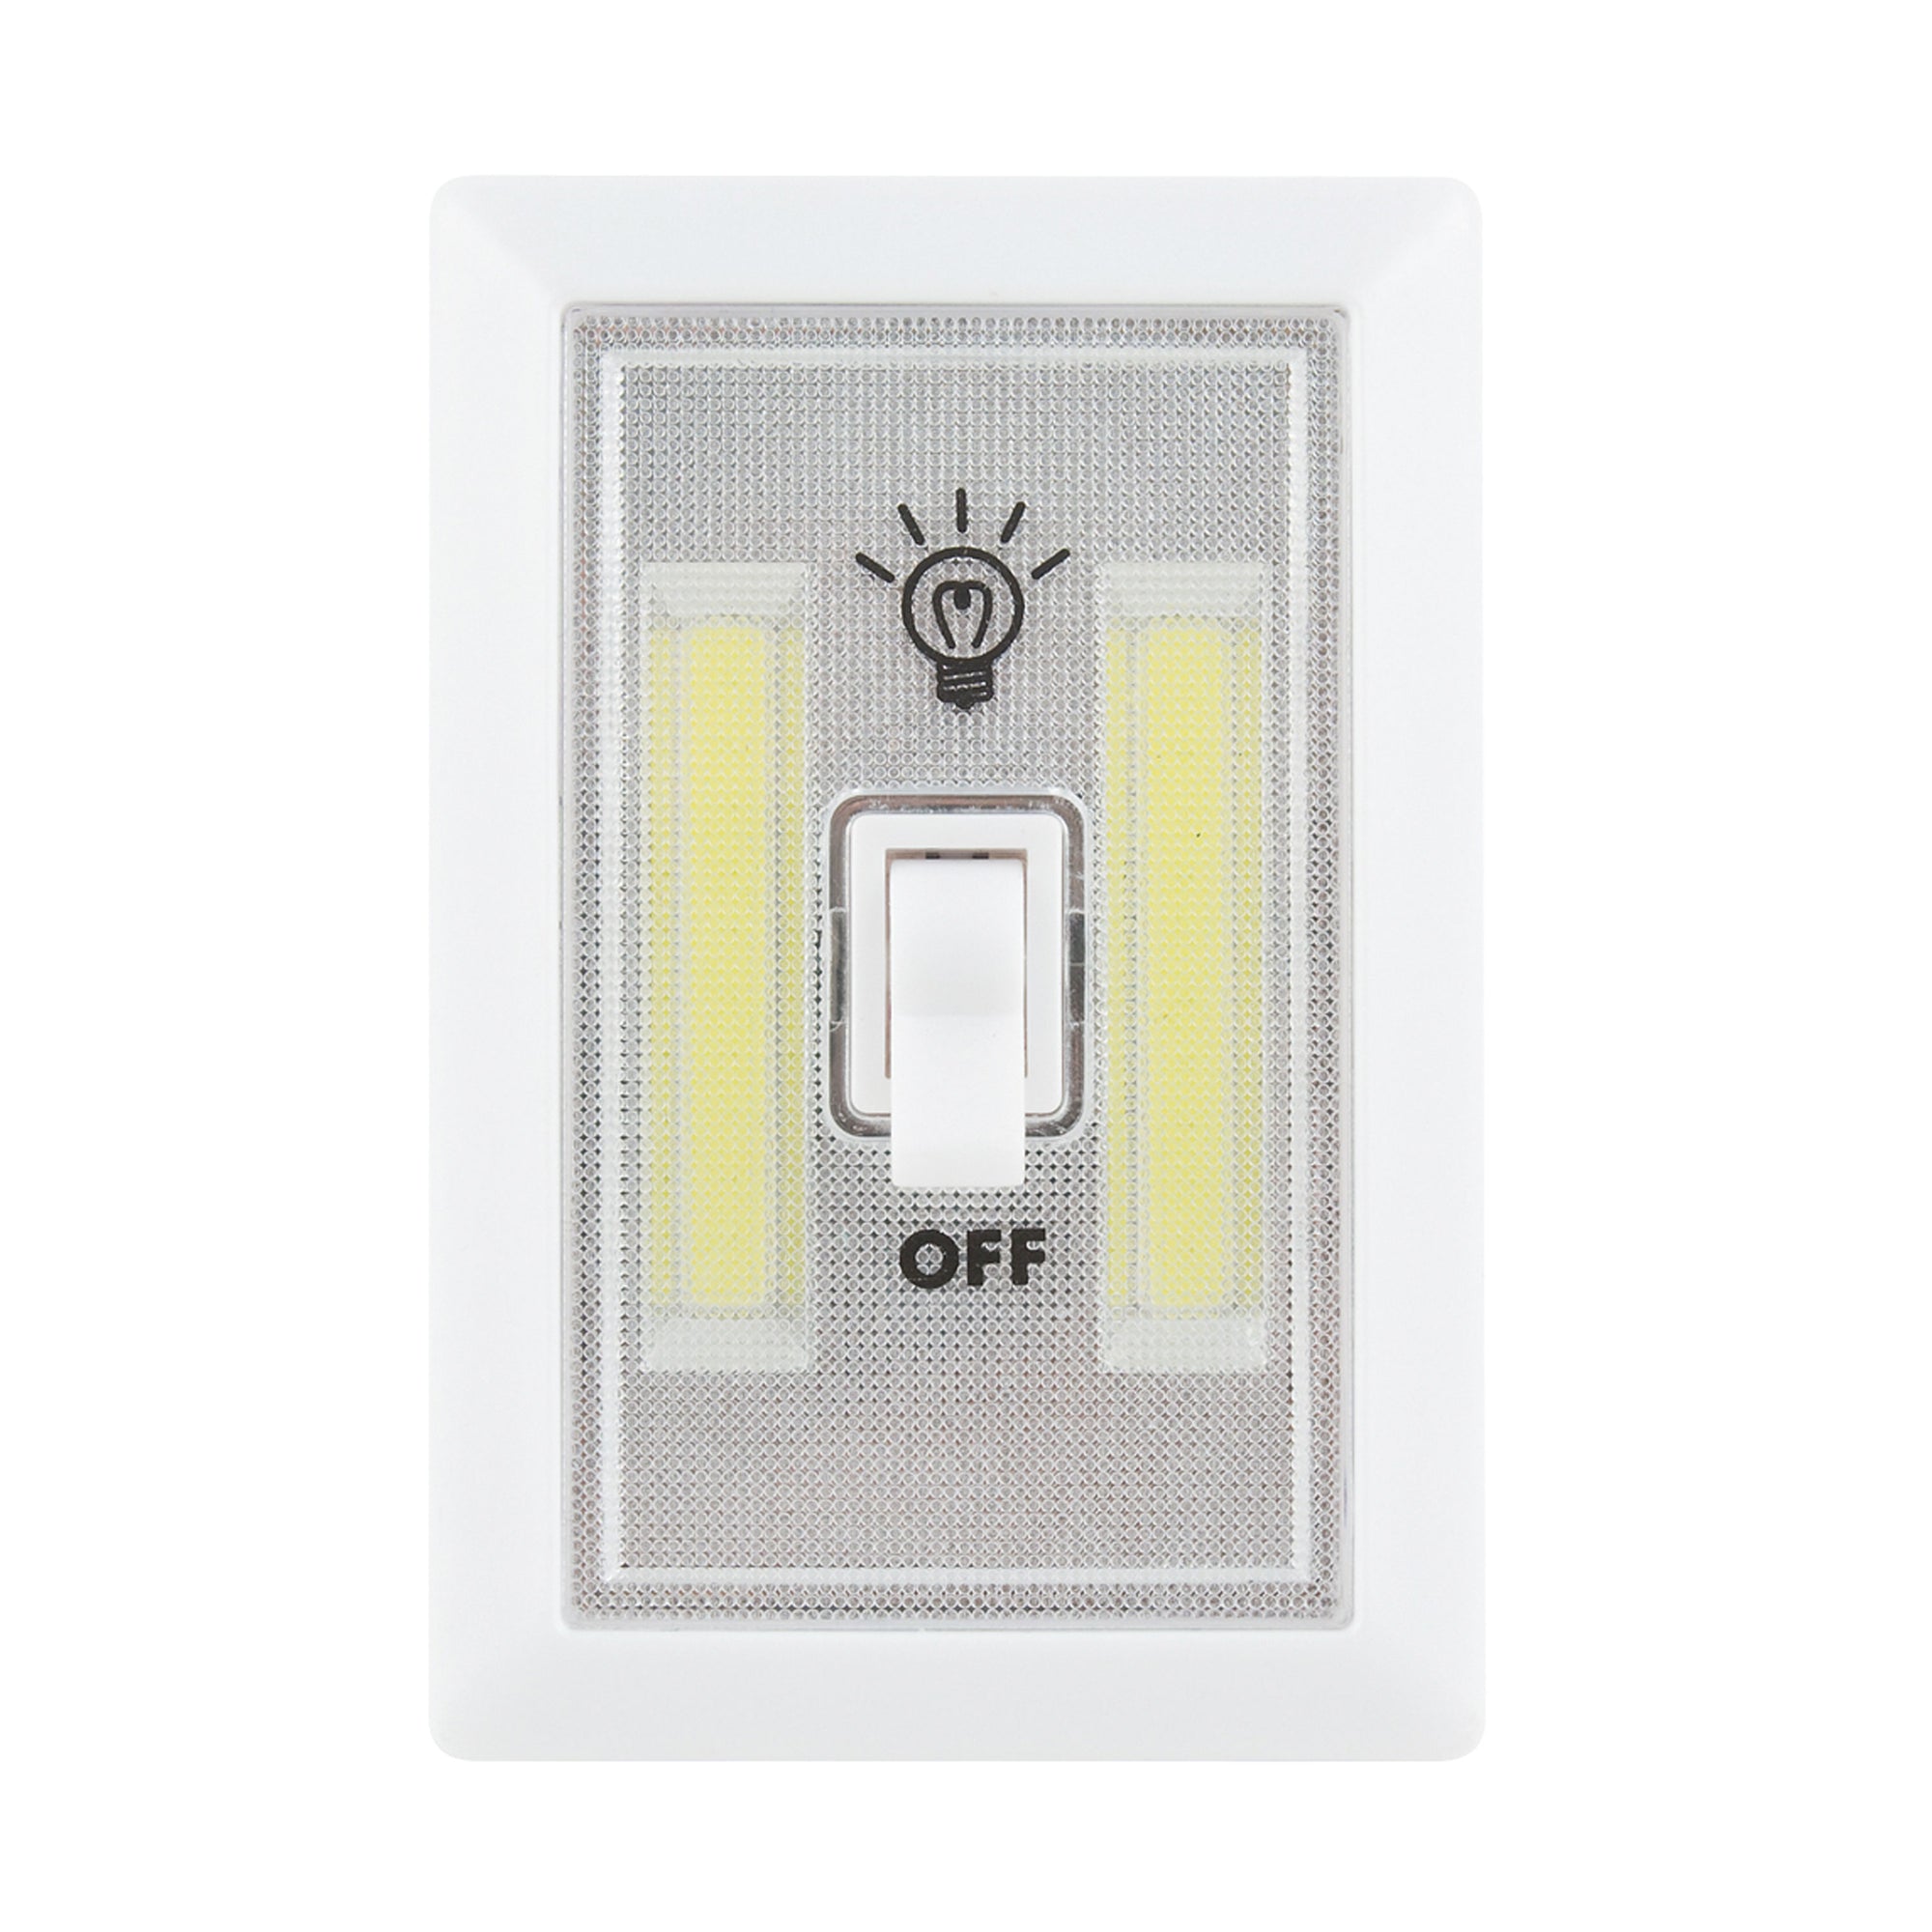 AP Products 025-020 Glow Max Cordless Light Switch - 200 Lumens, 12 Pack